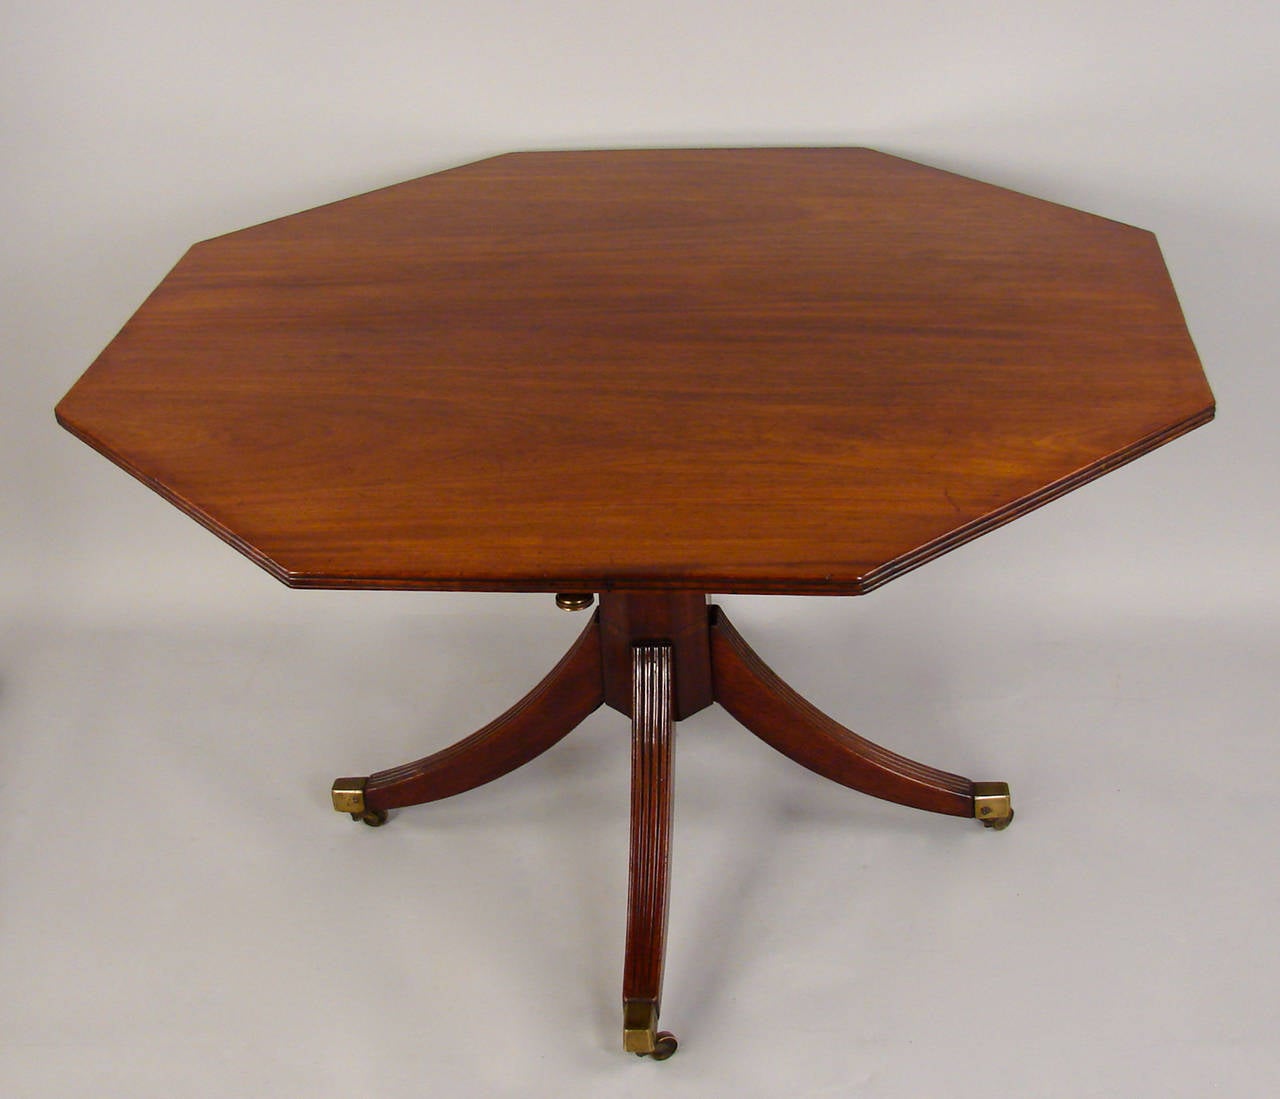 A good quality early Regency centre table, the octagonal top with a reeded edge supported by a tapered eight-sided central support terminating in a down swept reeded quadripartite base ending in box casters, circa 1800.